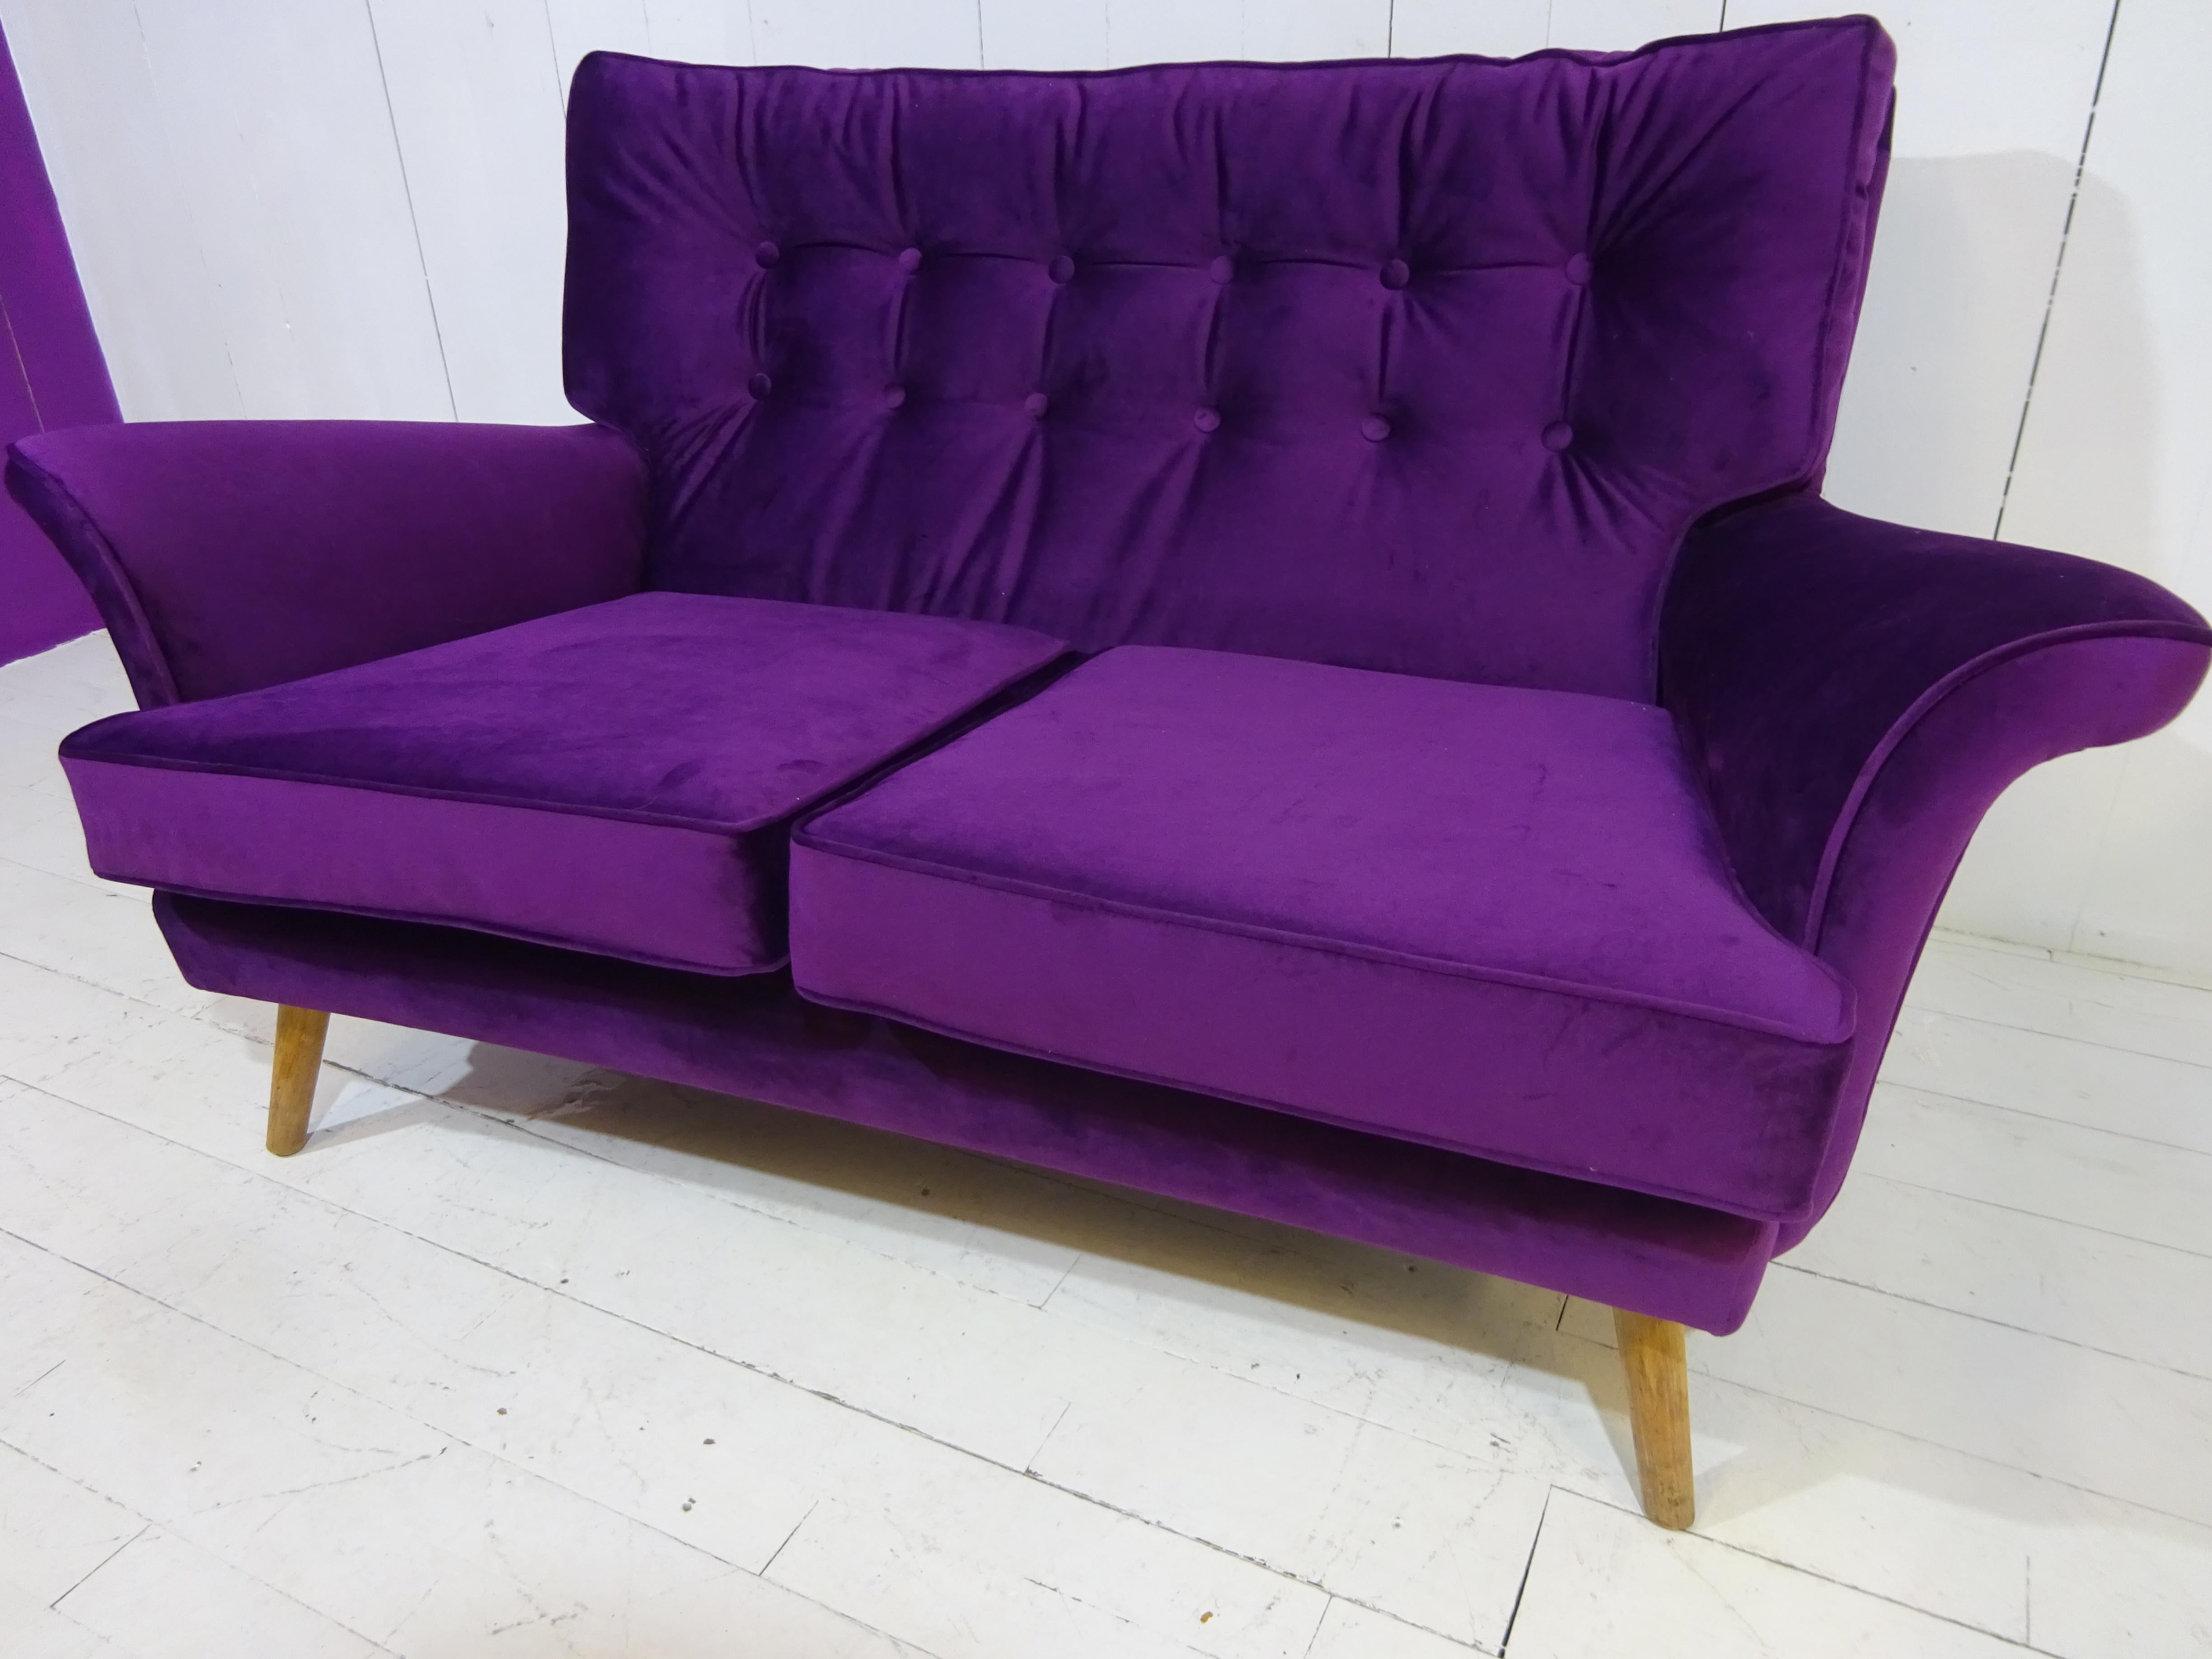 Stunning Limited Edition sofa

This is a limited edition one off compact sofa by The Rare Chair Company. 

Absolutely fabulous and unique lounge sofa dated circa 1950. Designed, manufactured, stamped and distributed by H. Vaughan of Spital